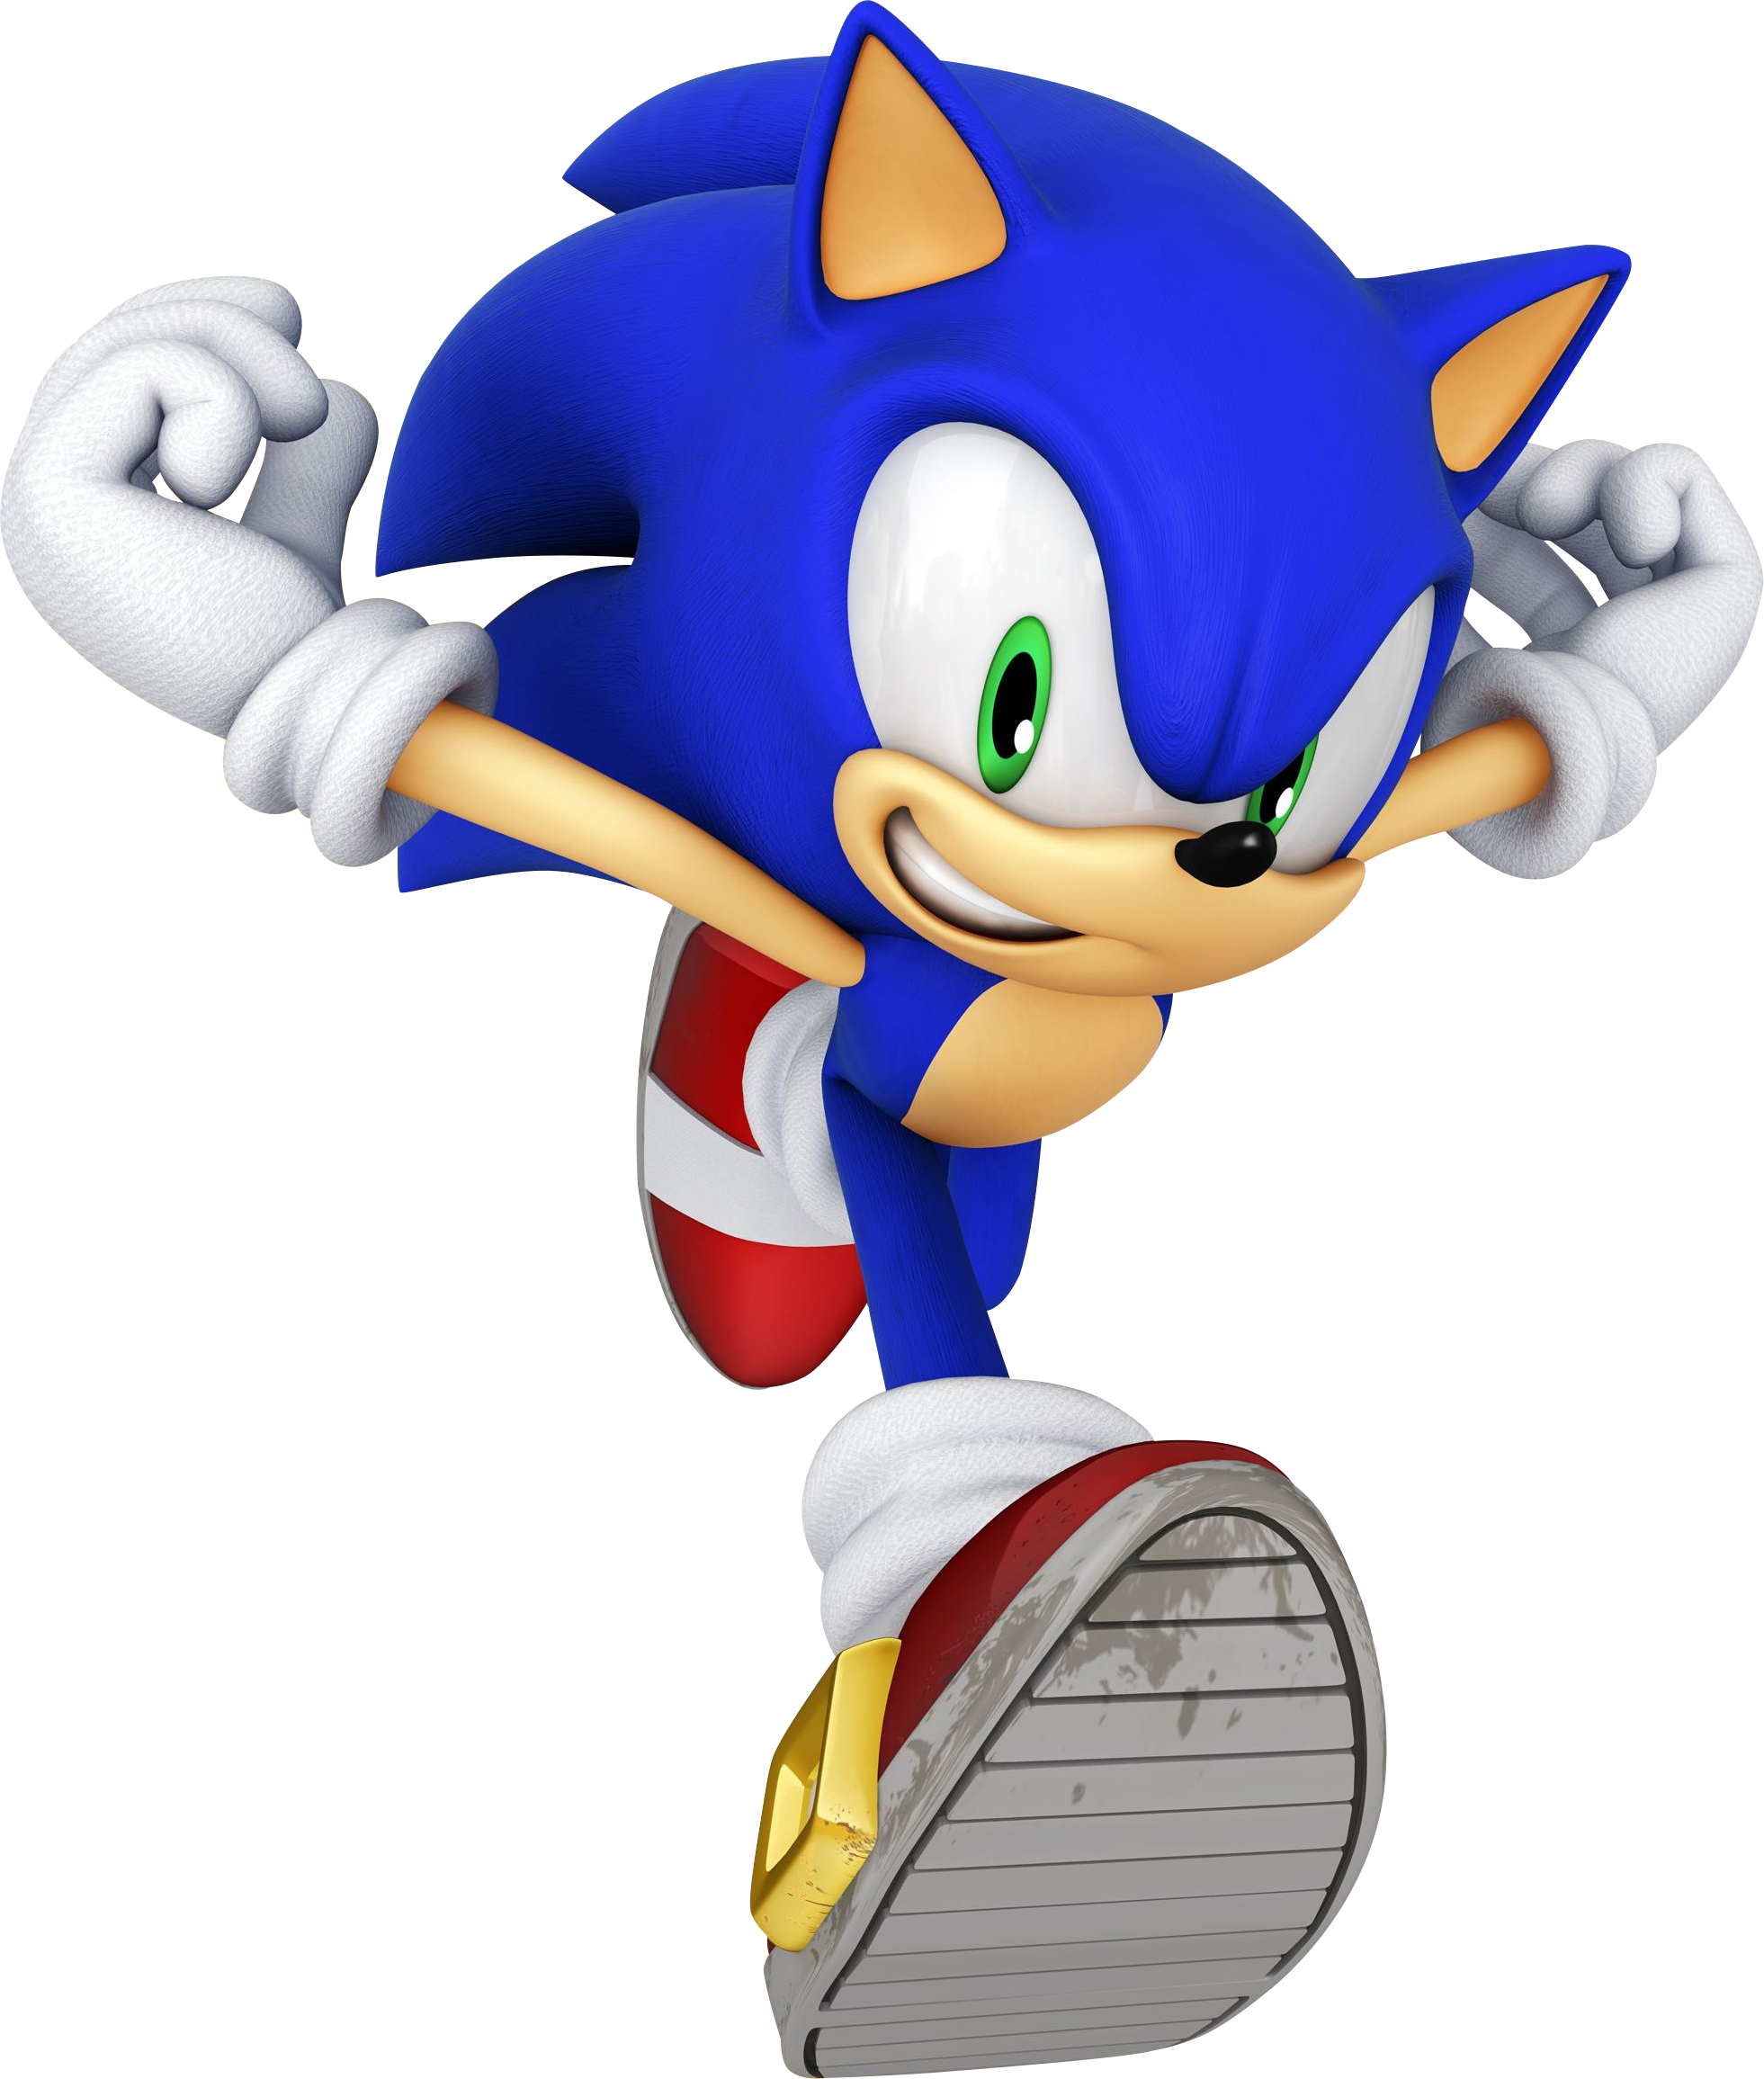 sonic the hedgehog character